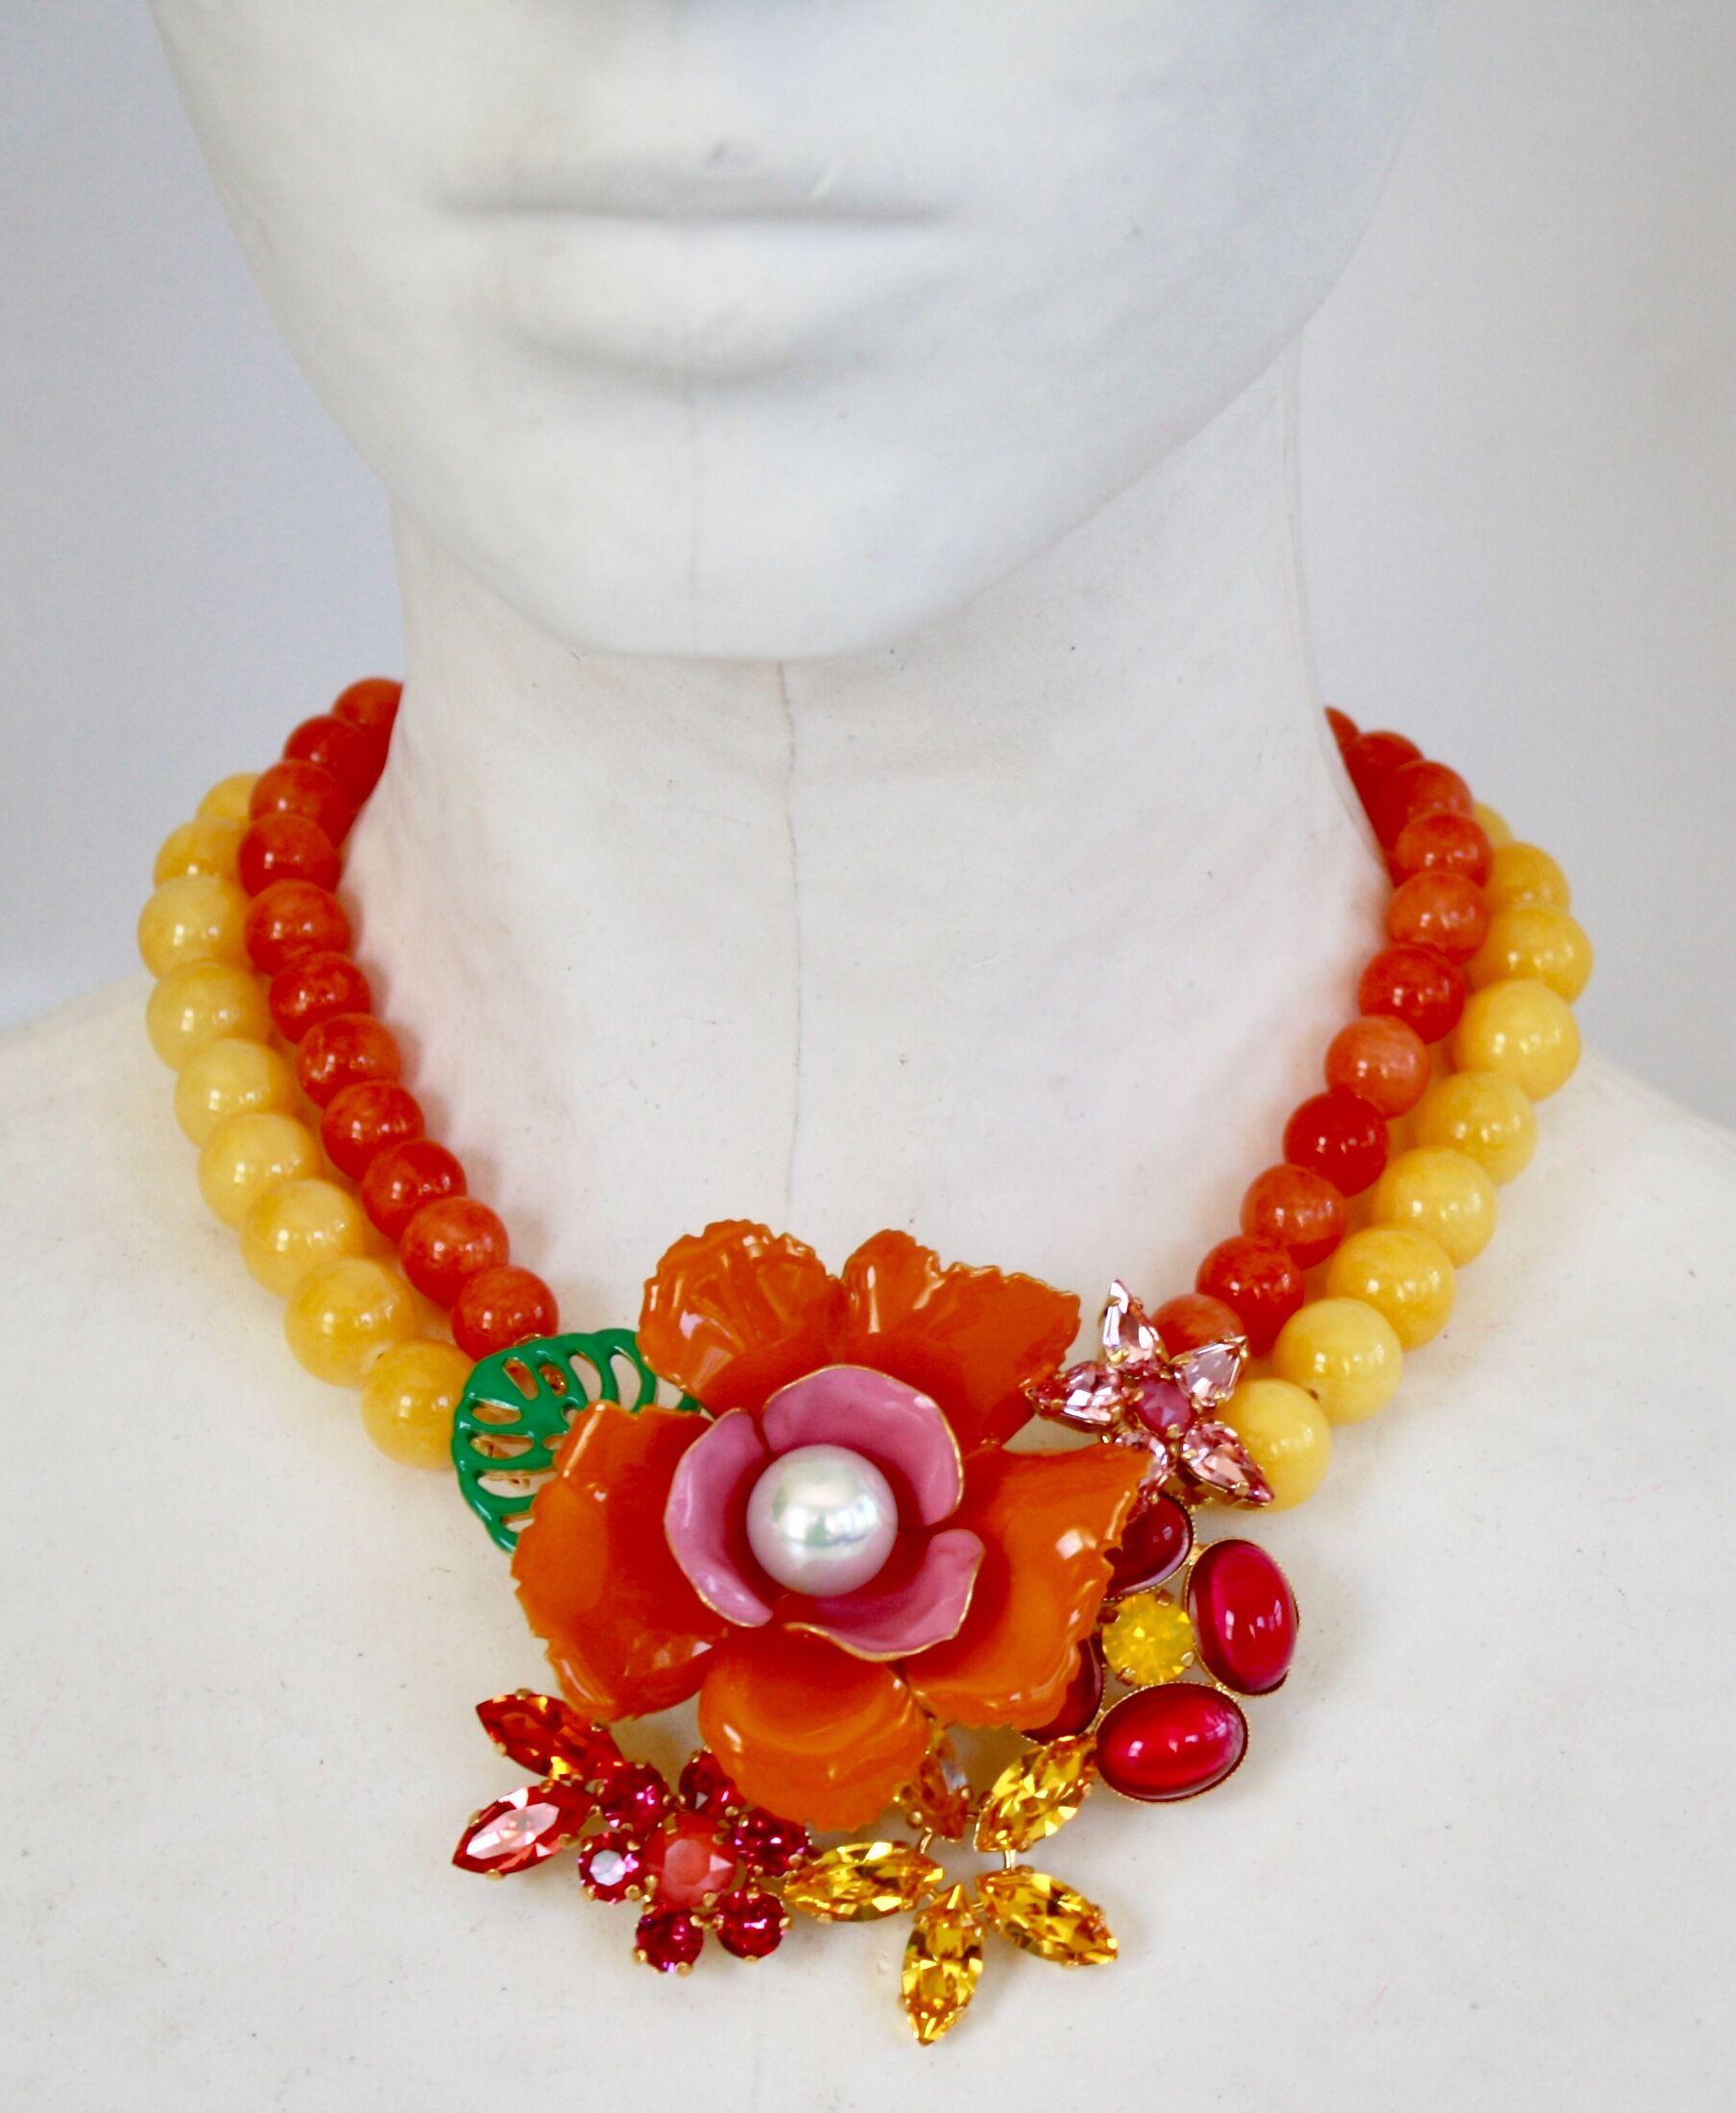 Handmade glass bead necklace with enamel and Swarovski Crystal flowers from Philippe Ferrandis.

Flower pendant is 3